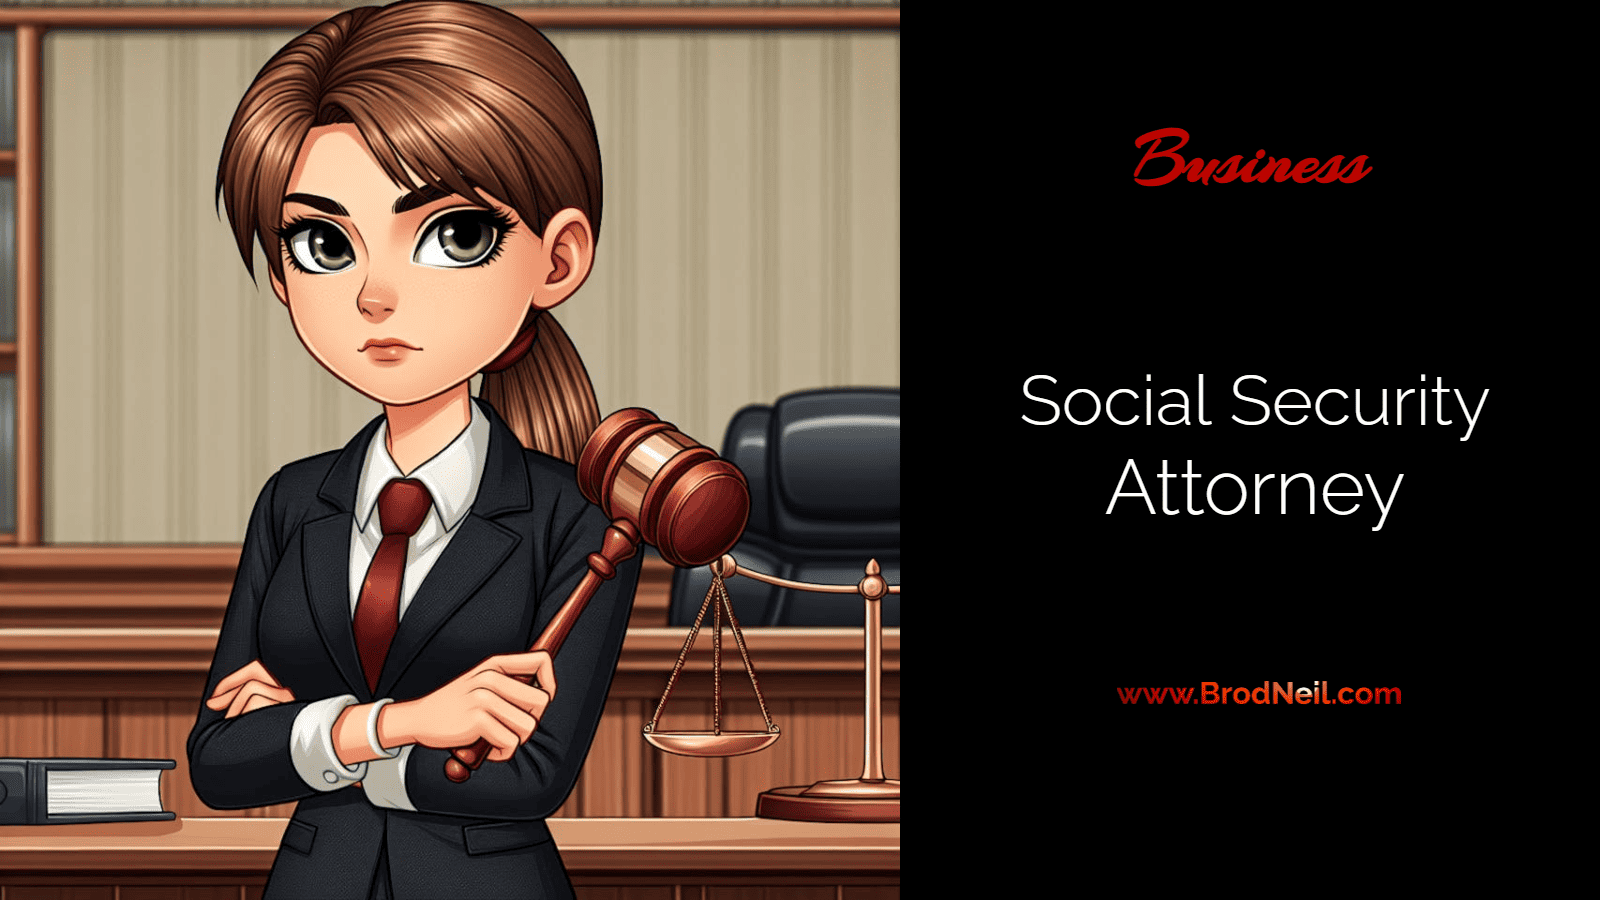 young lady attorney with a gavel - social security attorney - Business